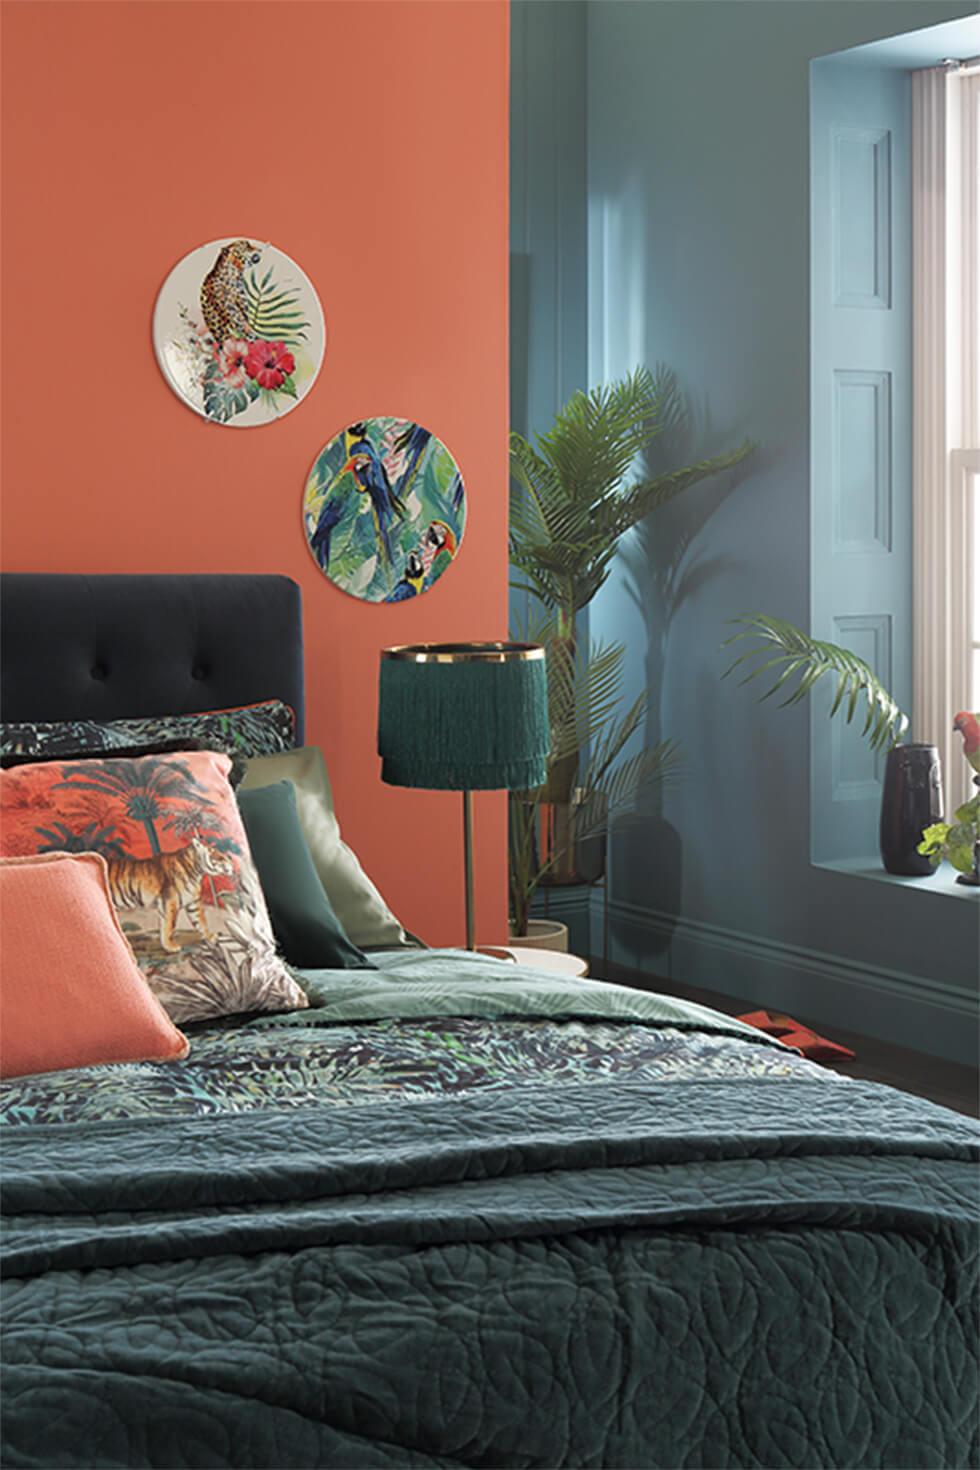 Tropical teal bedroom with contrasting orange and teal walls, and a dark velvet bed.